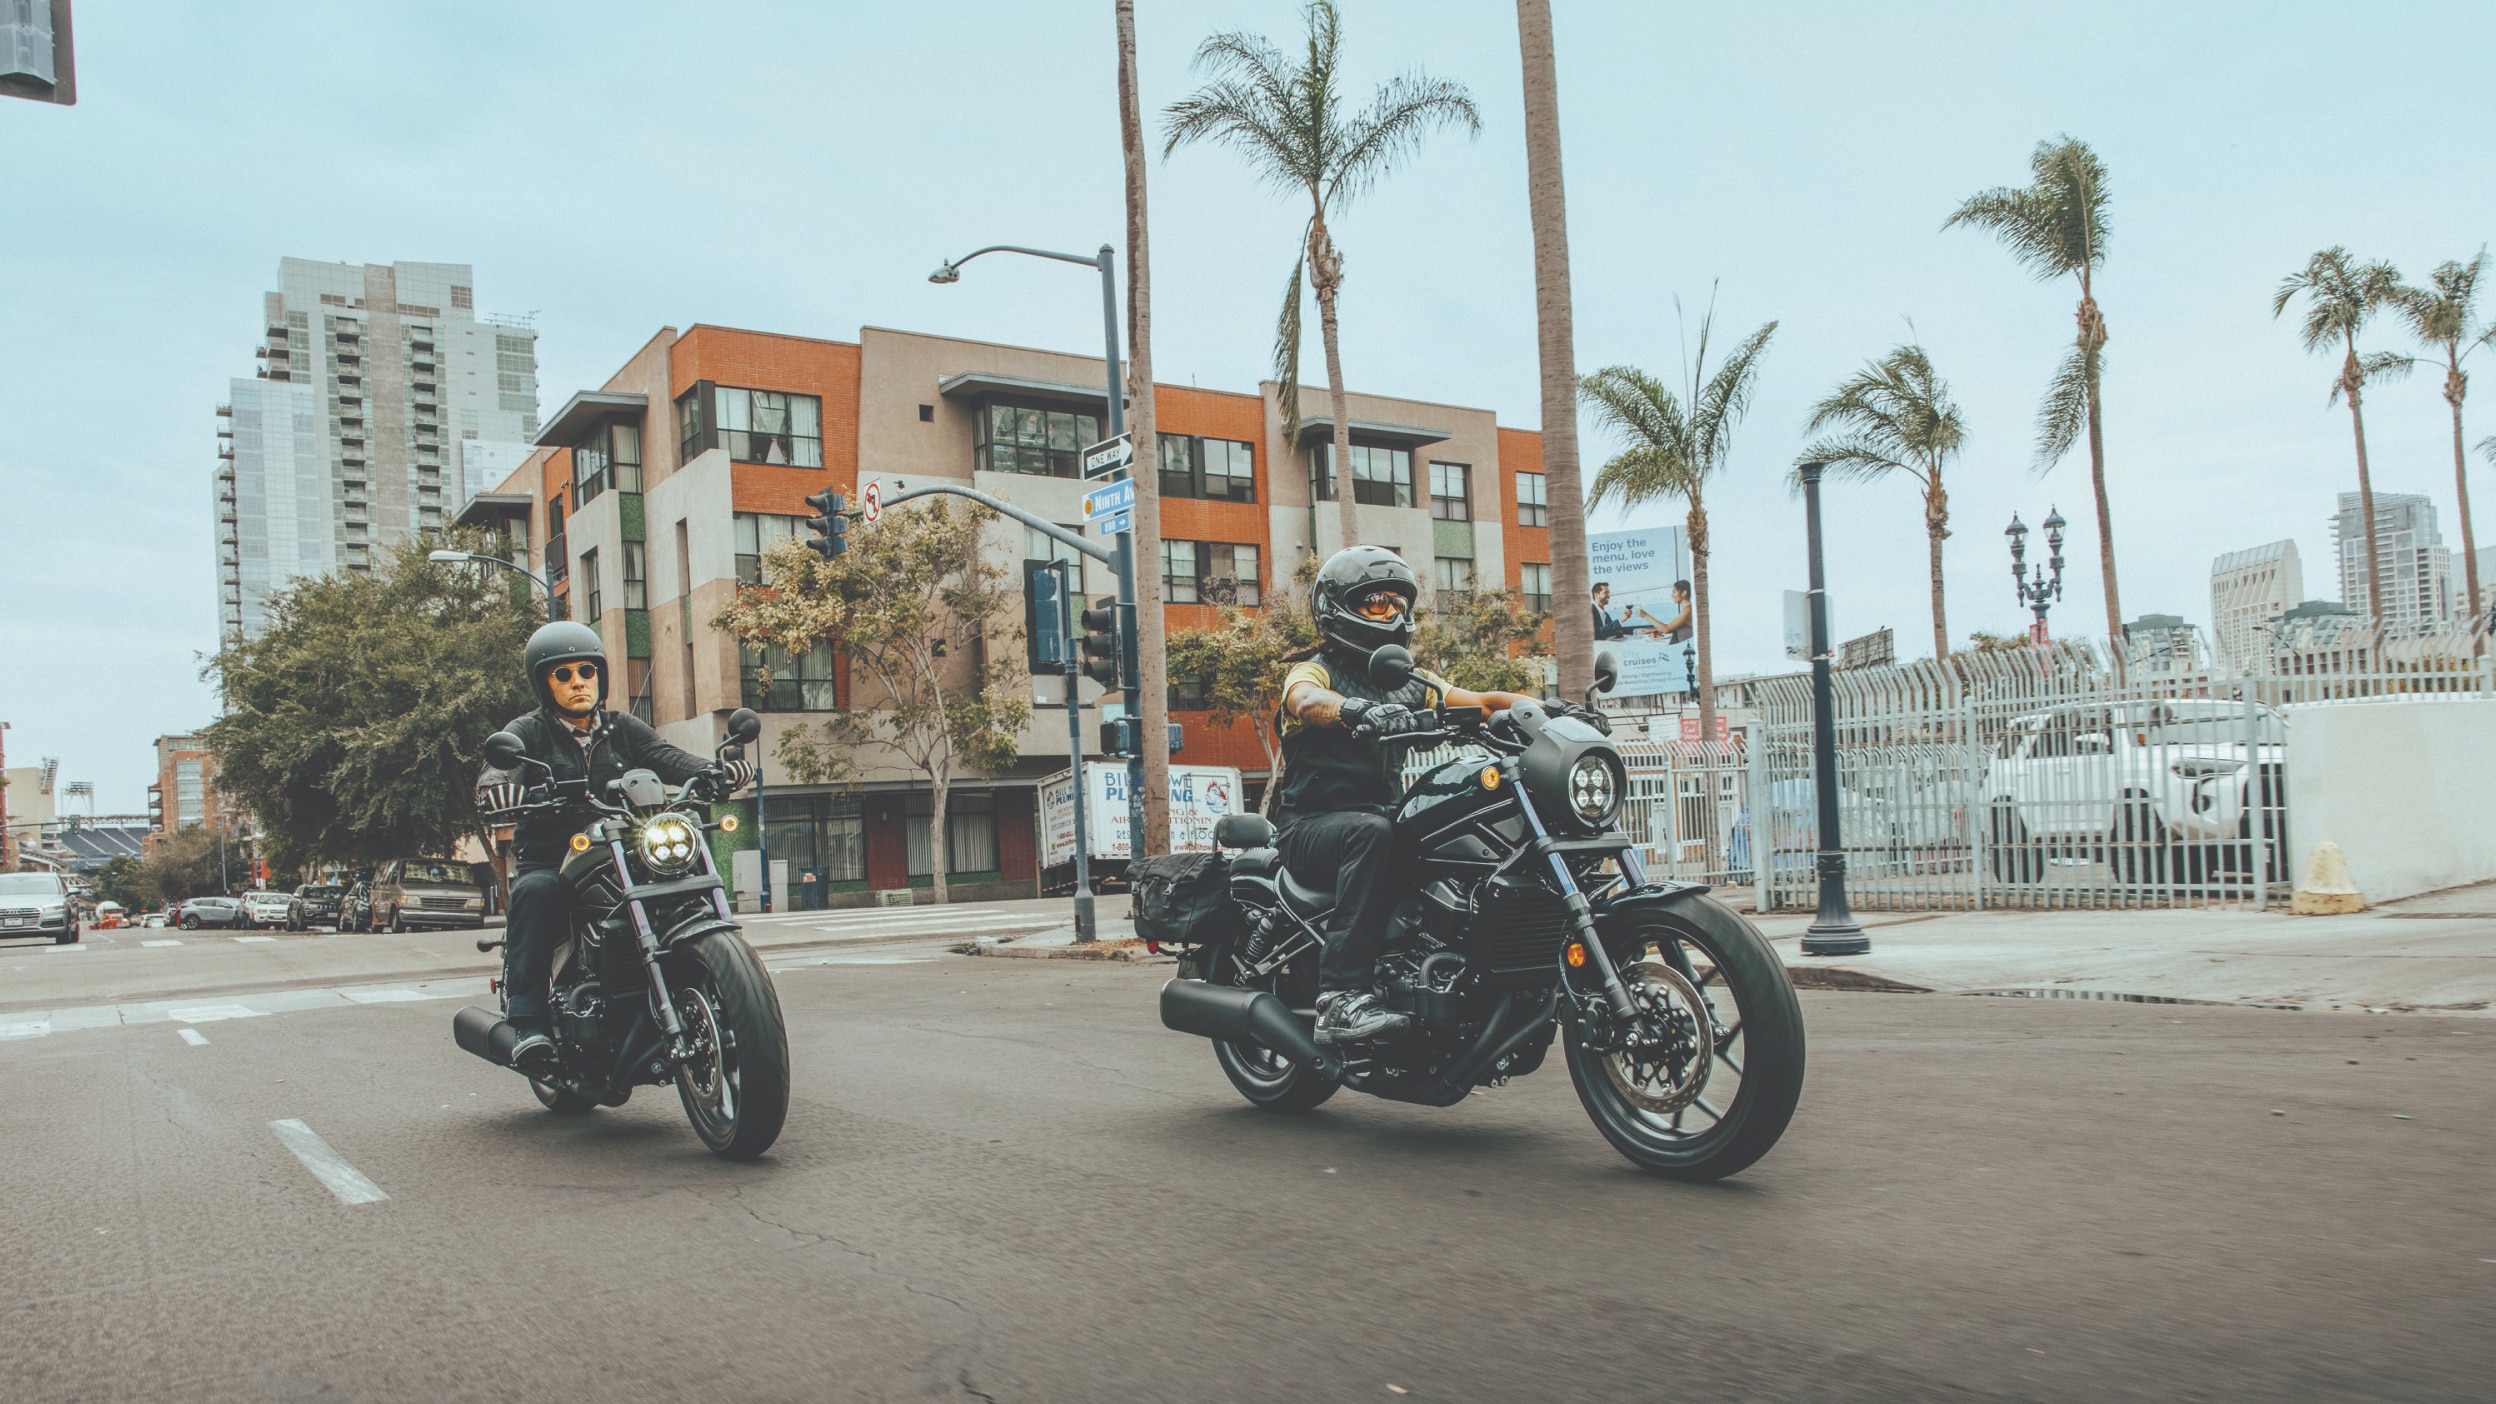 Two riders on Honda Cruiser motorcycles in an urban setting with palm trees in the background